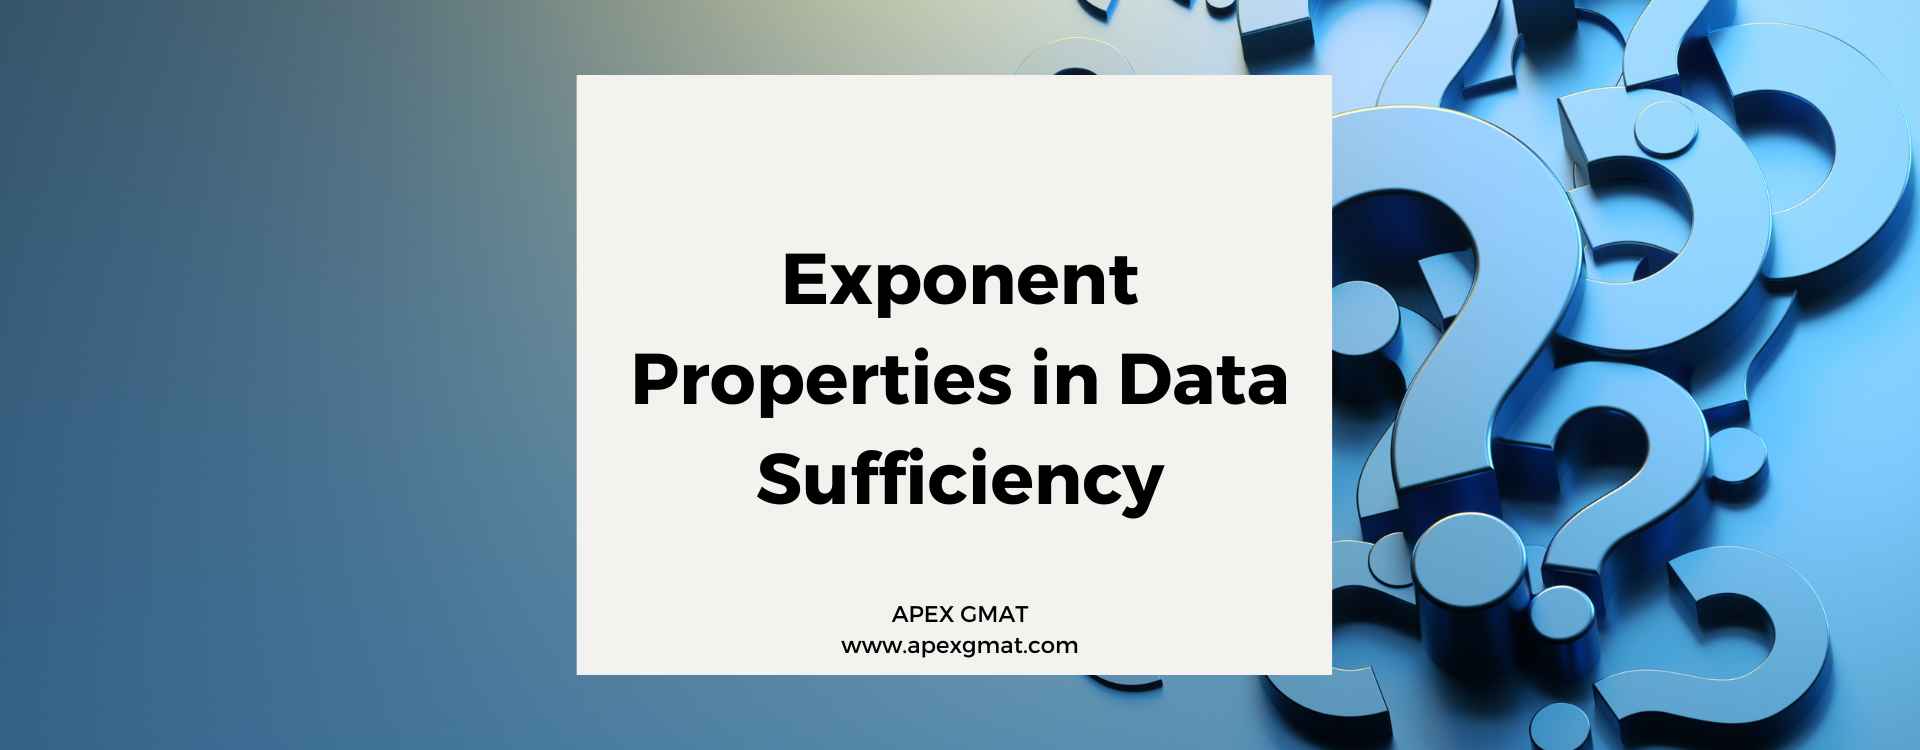 Exponent Properties in Data Sufficiency